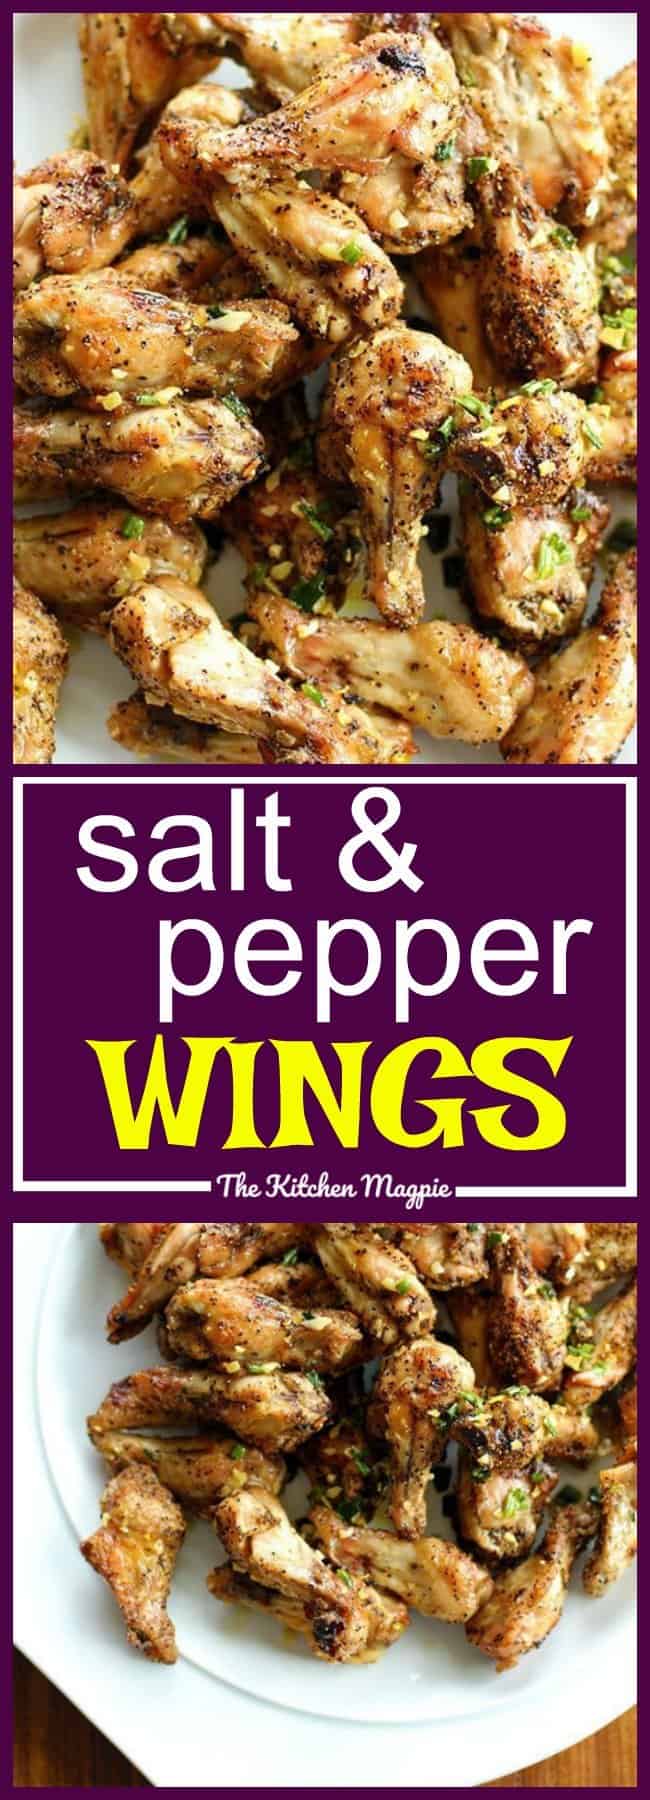 The most amazing Salt and Pepper Chicken Wings I have ever made. The ingredients are simple, delicious & in your fridge! Check out my photos & instructions! recipe from @kitchenmagpie